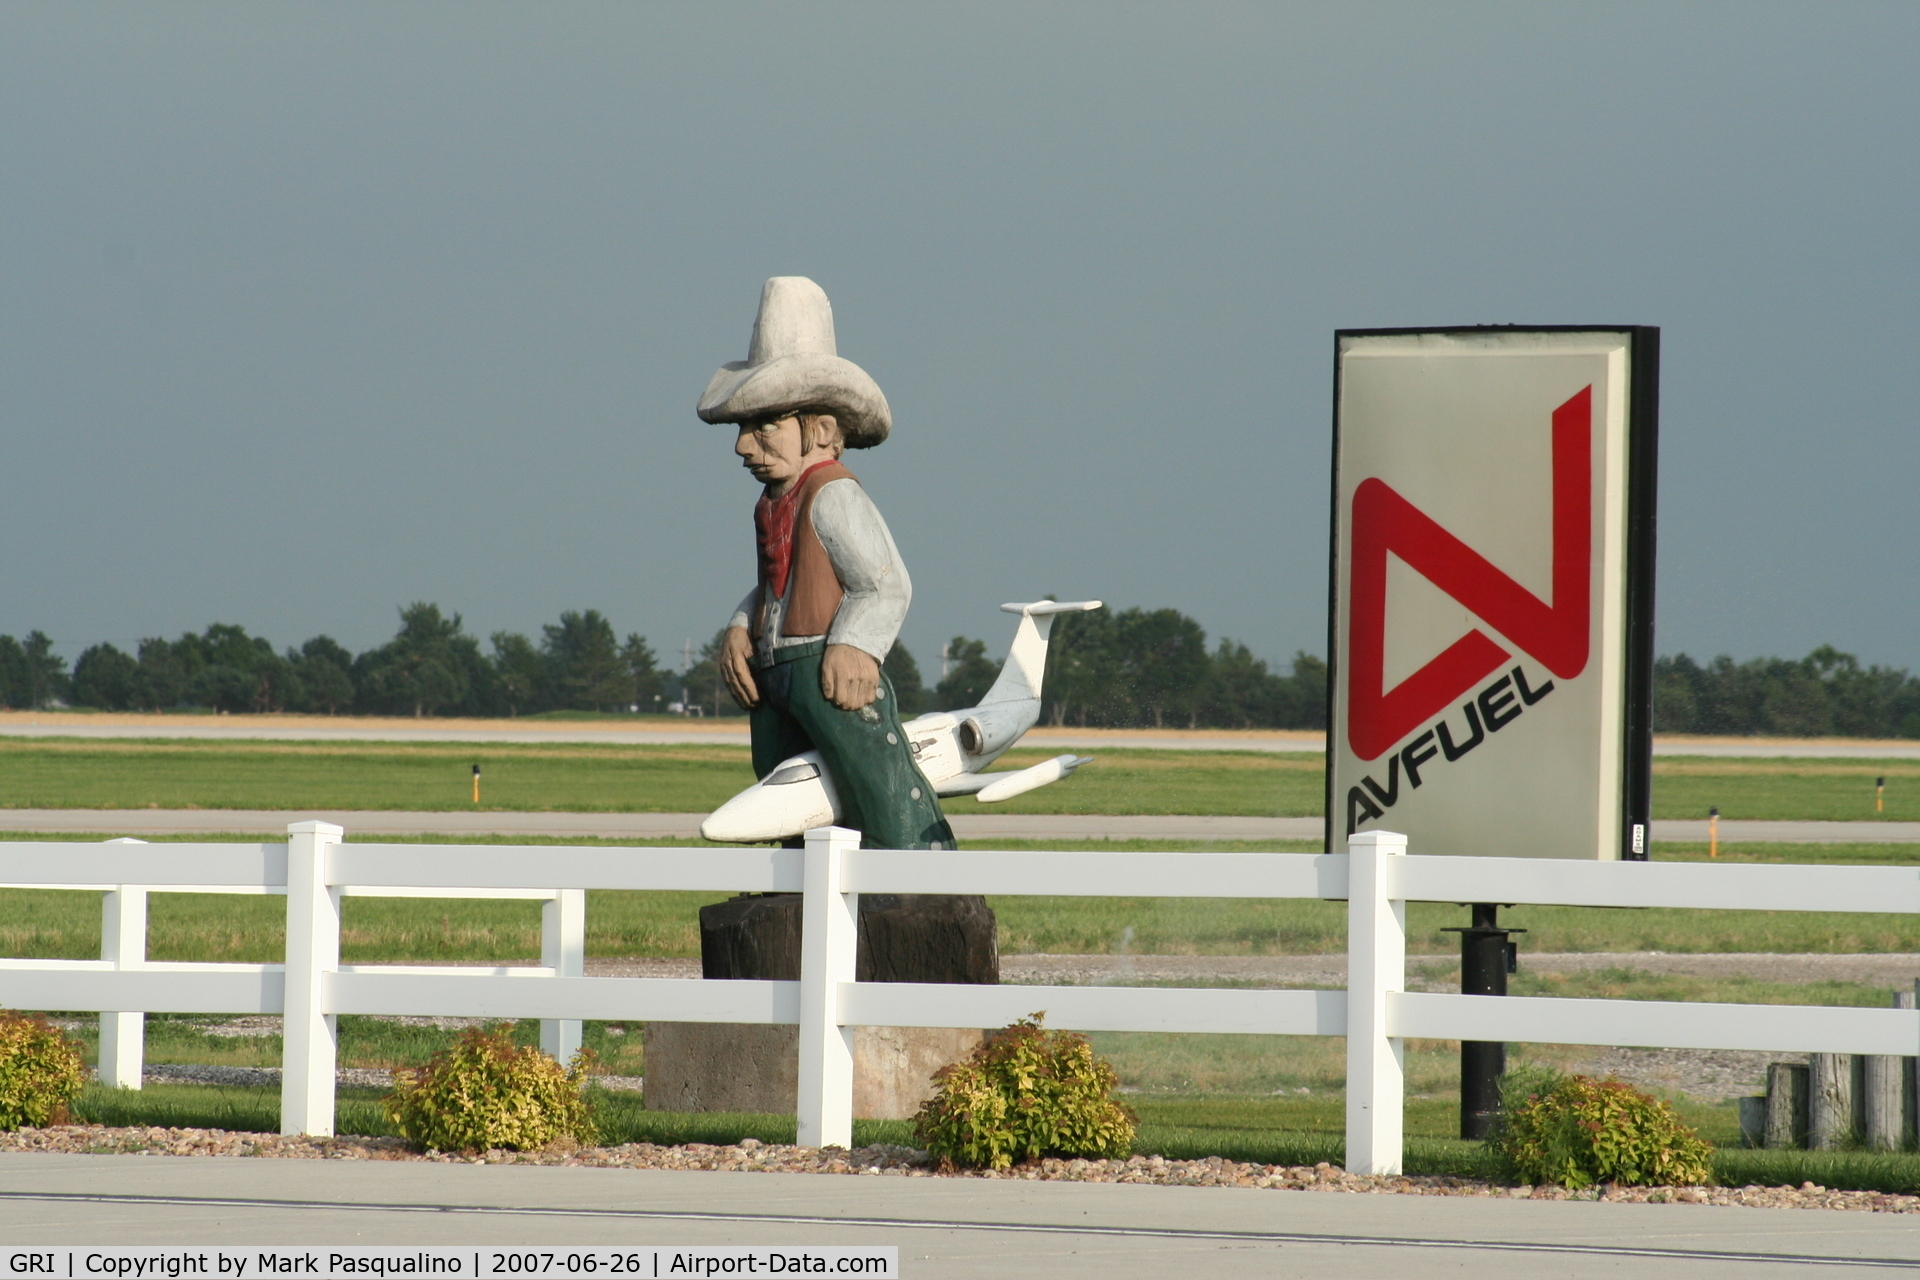 Central Nebraska Regional Airport (GRI) - Cowboy on top of a Lear Jet at the General Aviation Terminal.